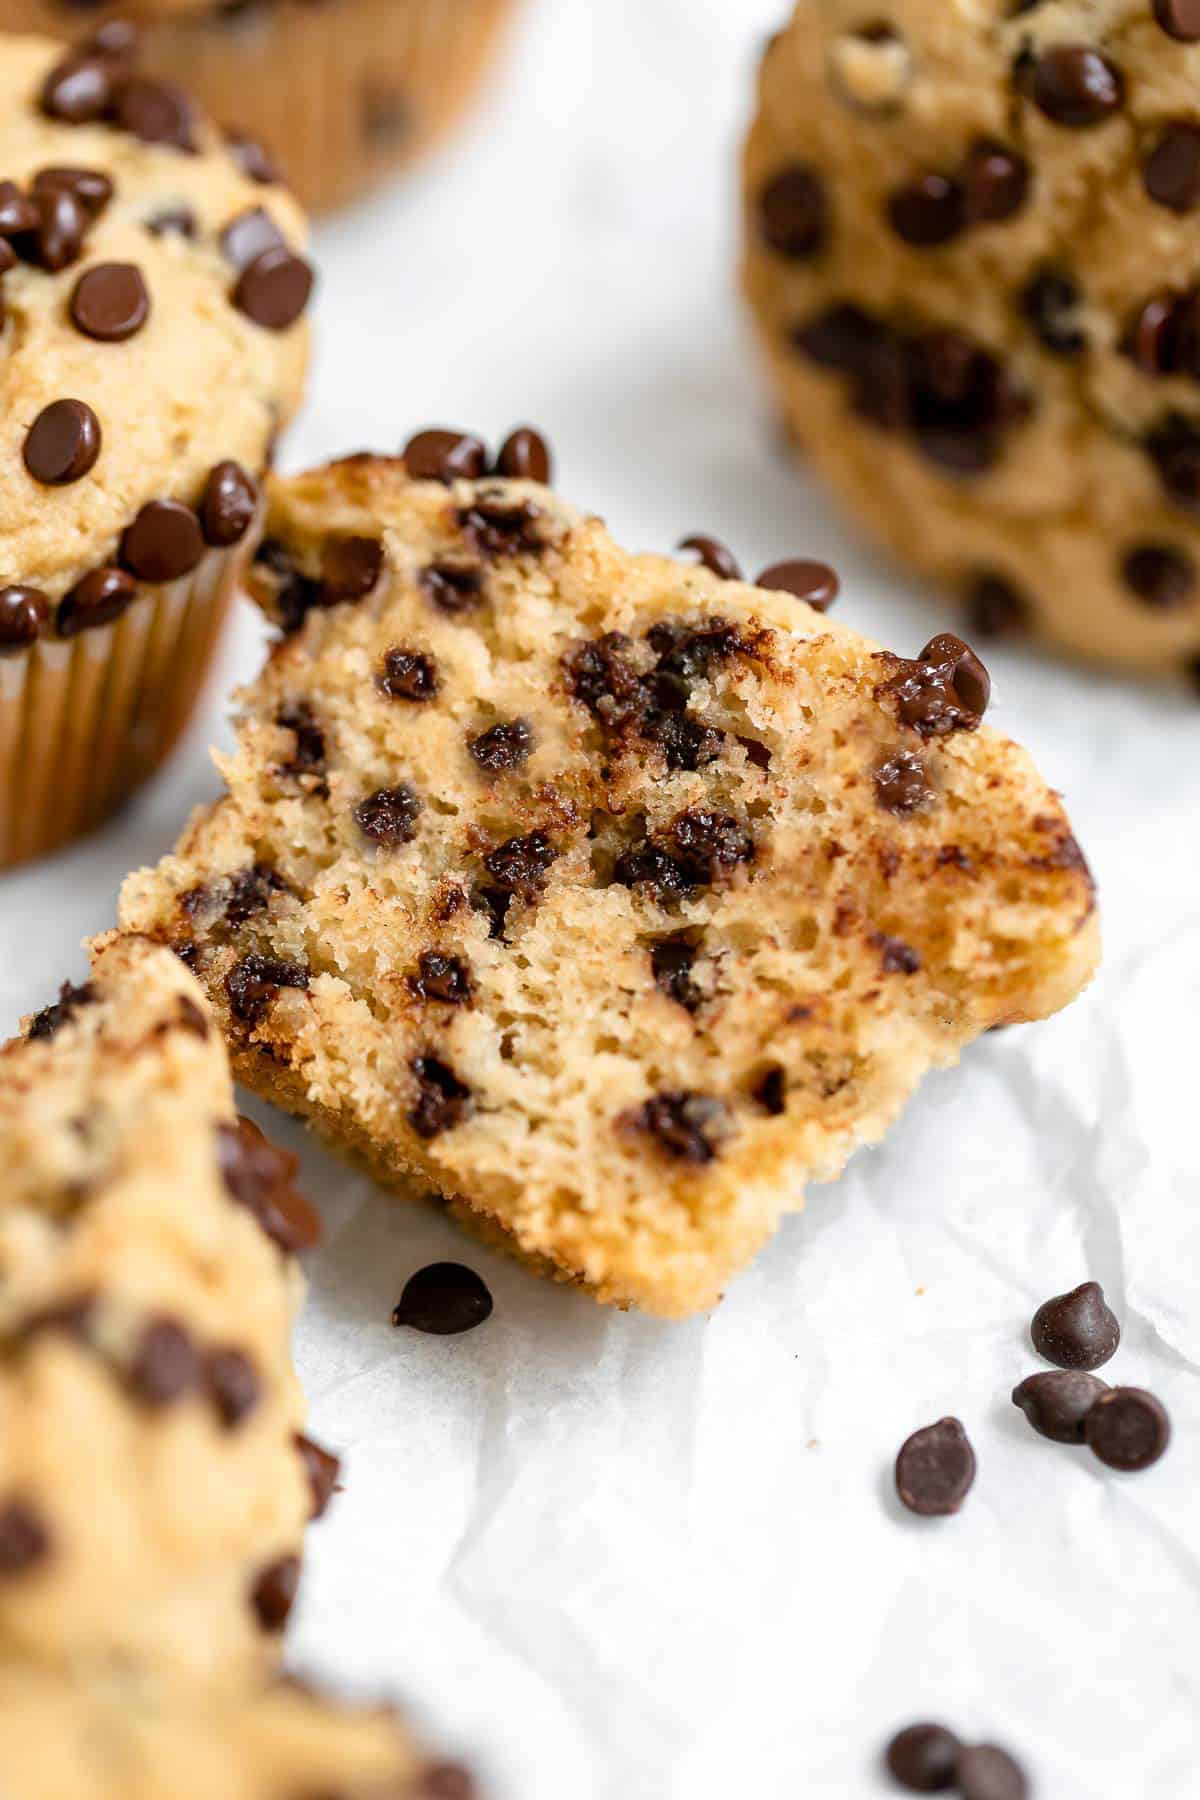 one muffin cut in half to show fluffy texture with chocolate chips